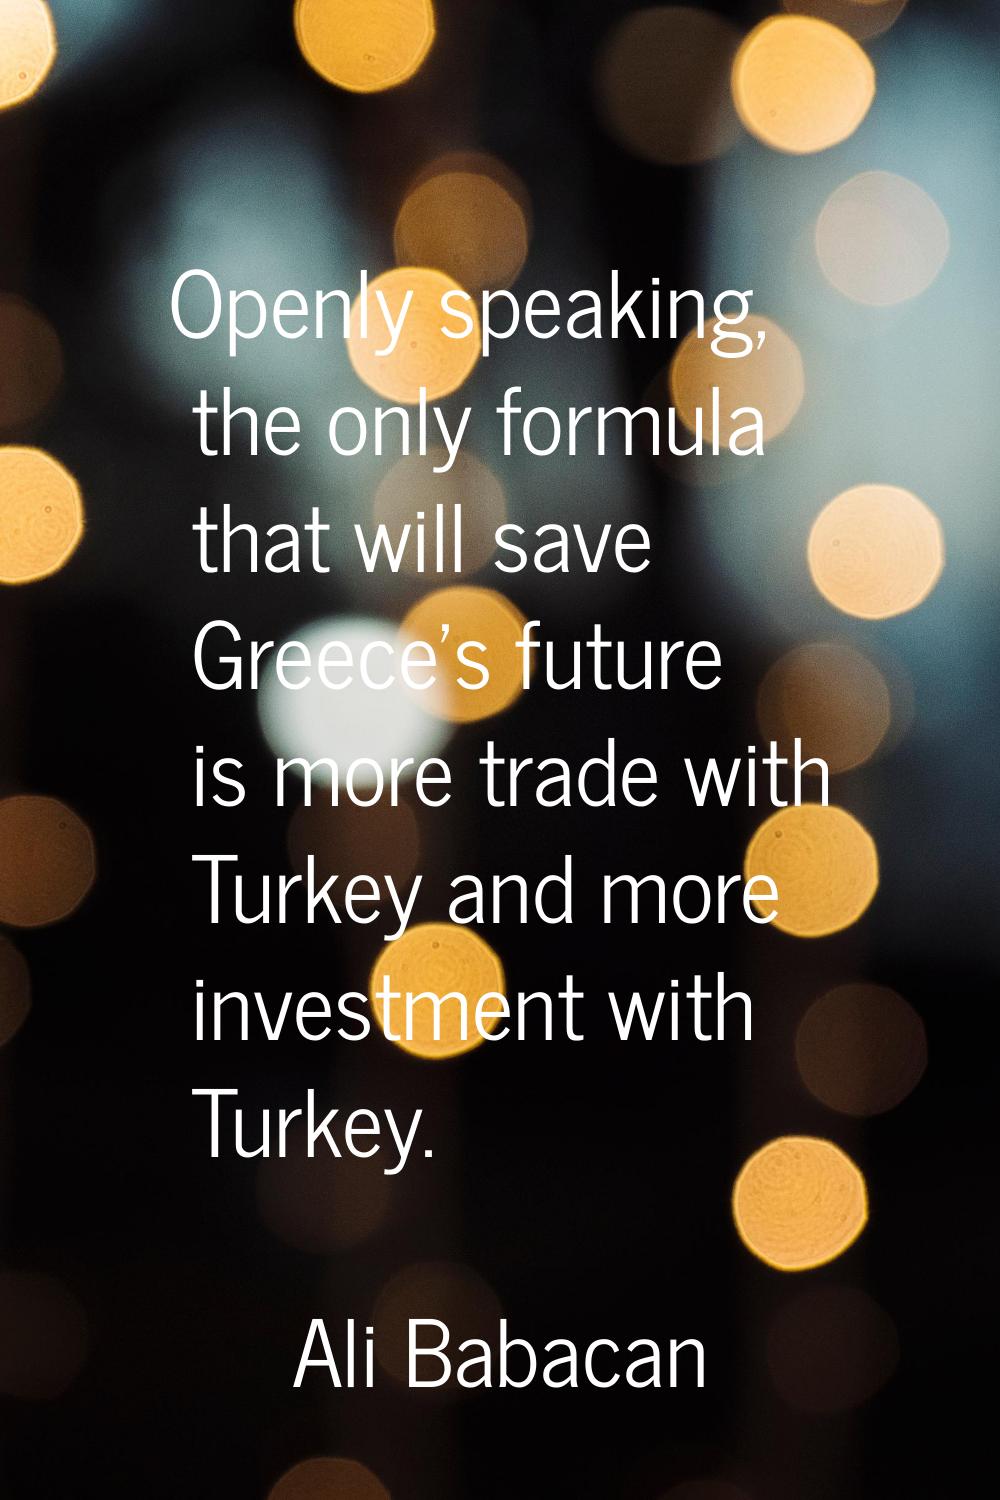 Openly speaking, the only formula that will save Greece's future is more trade with Turkey and more